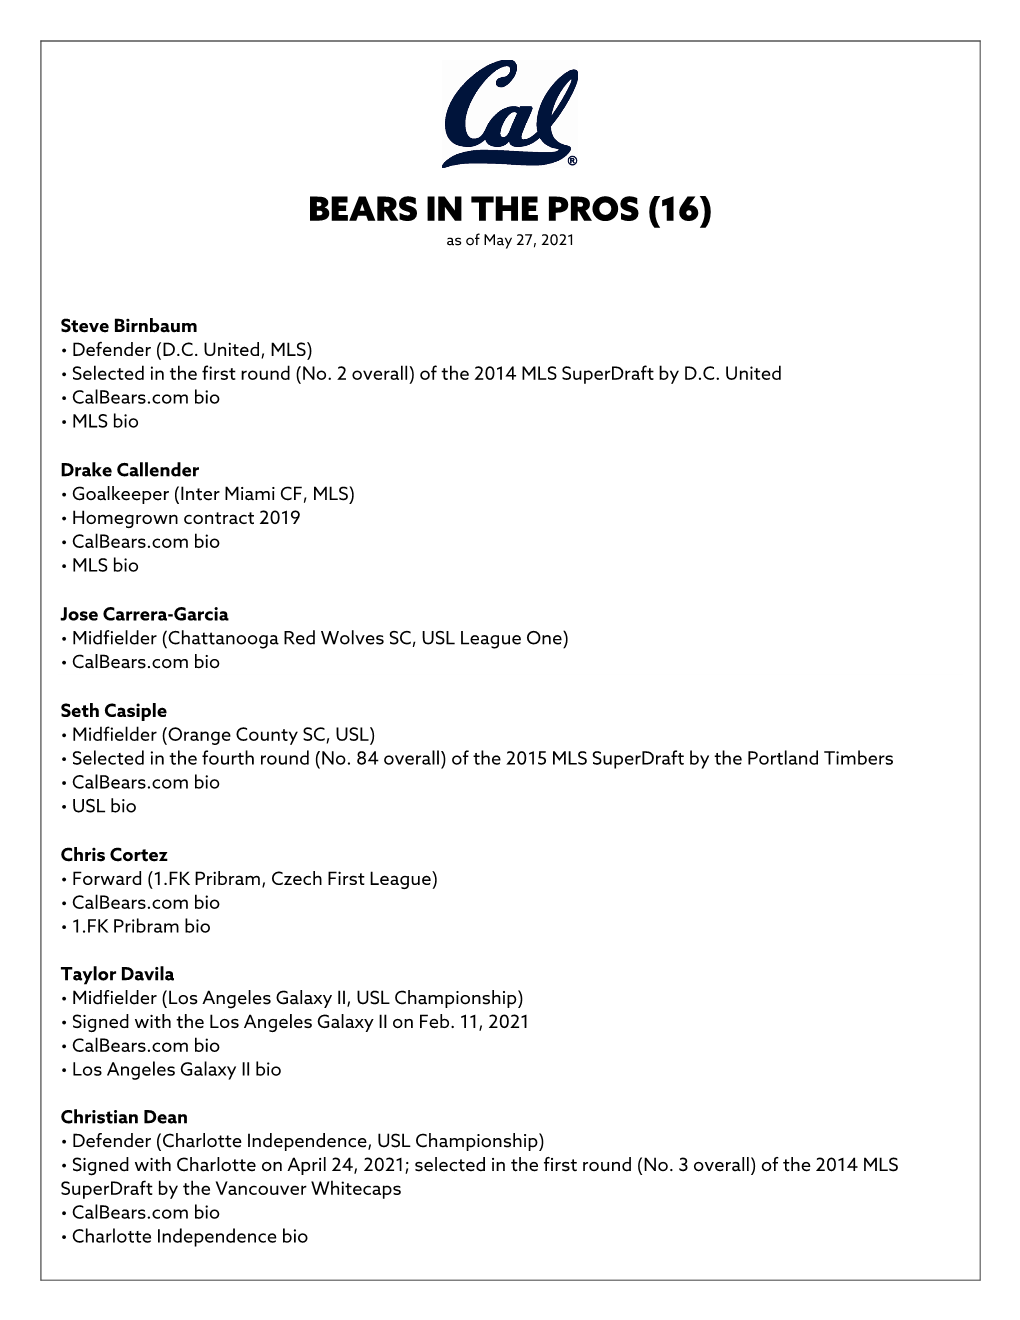 BEARS in the PROS (16) As of May 27, 2021